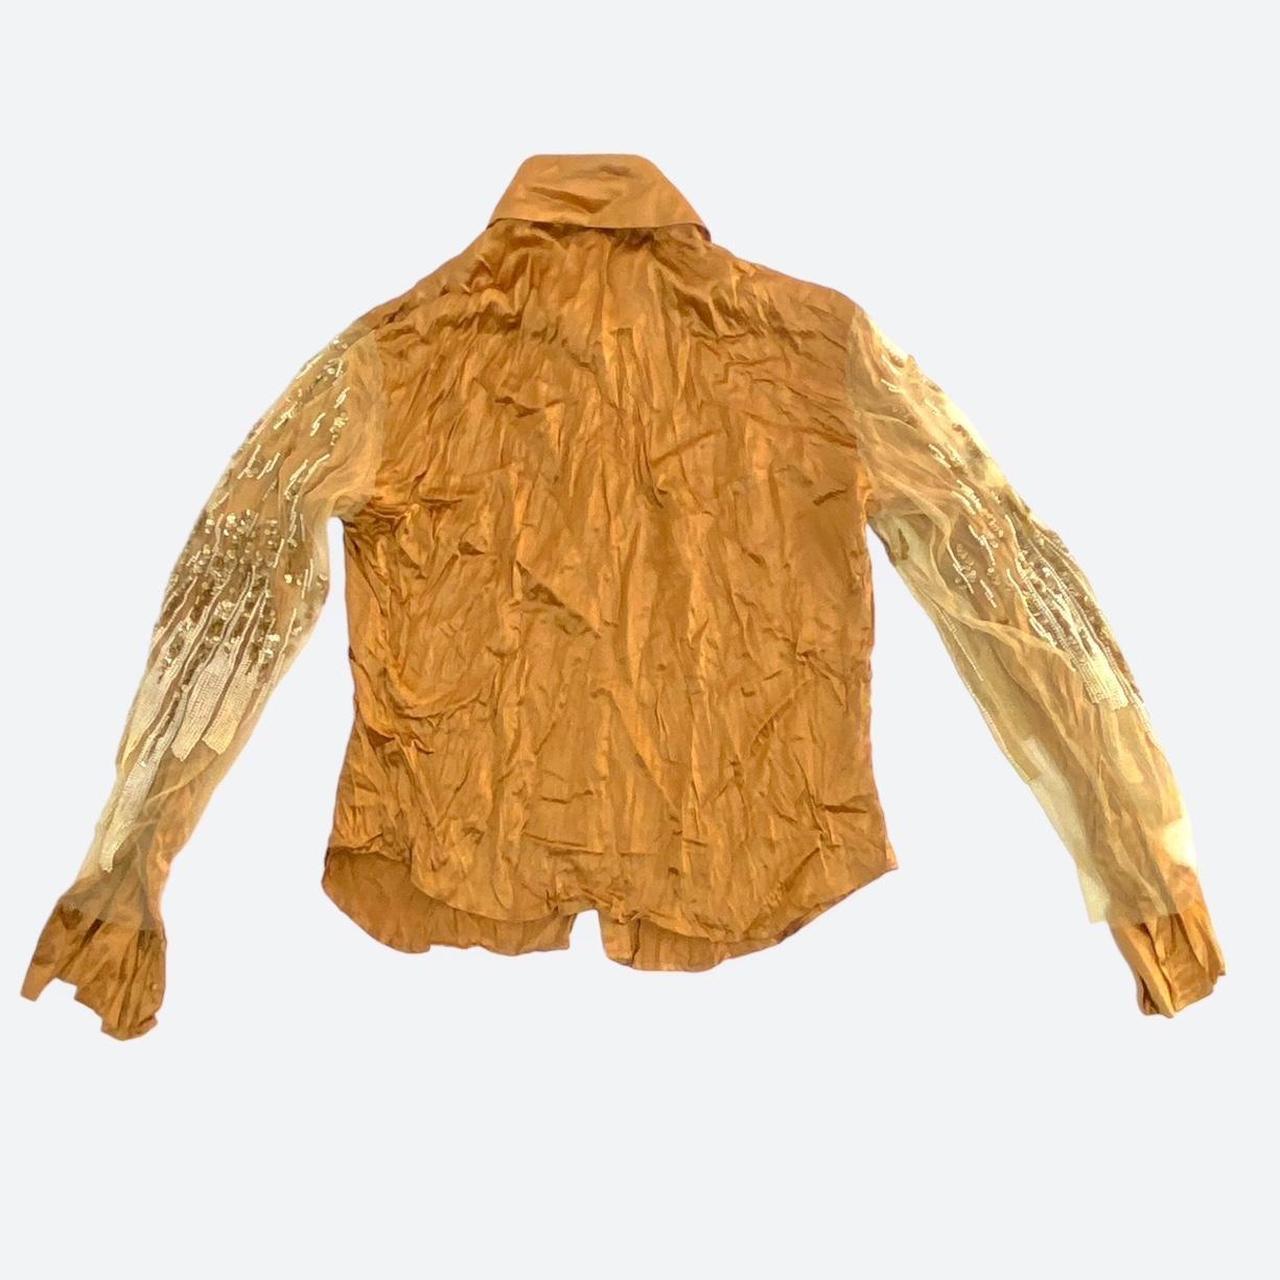 100% silk shirt from the early 2000s in a rich caramel tone of gold with a gorgeous satin glow due to the high-quality silk fabric, which is enhanced by a textured, creased finish. The sleeves are covered with a tulle layer that is completely